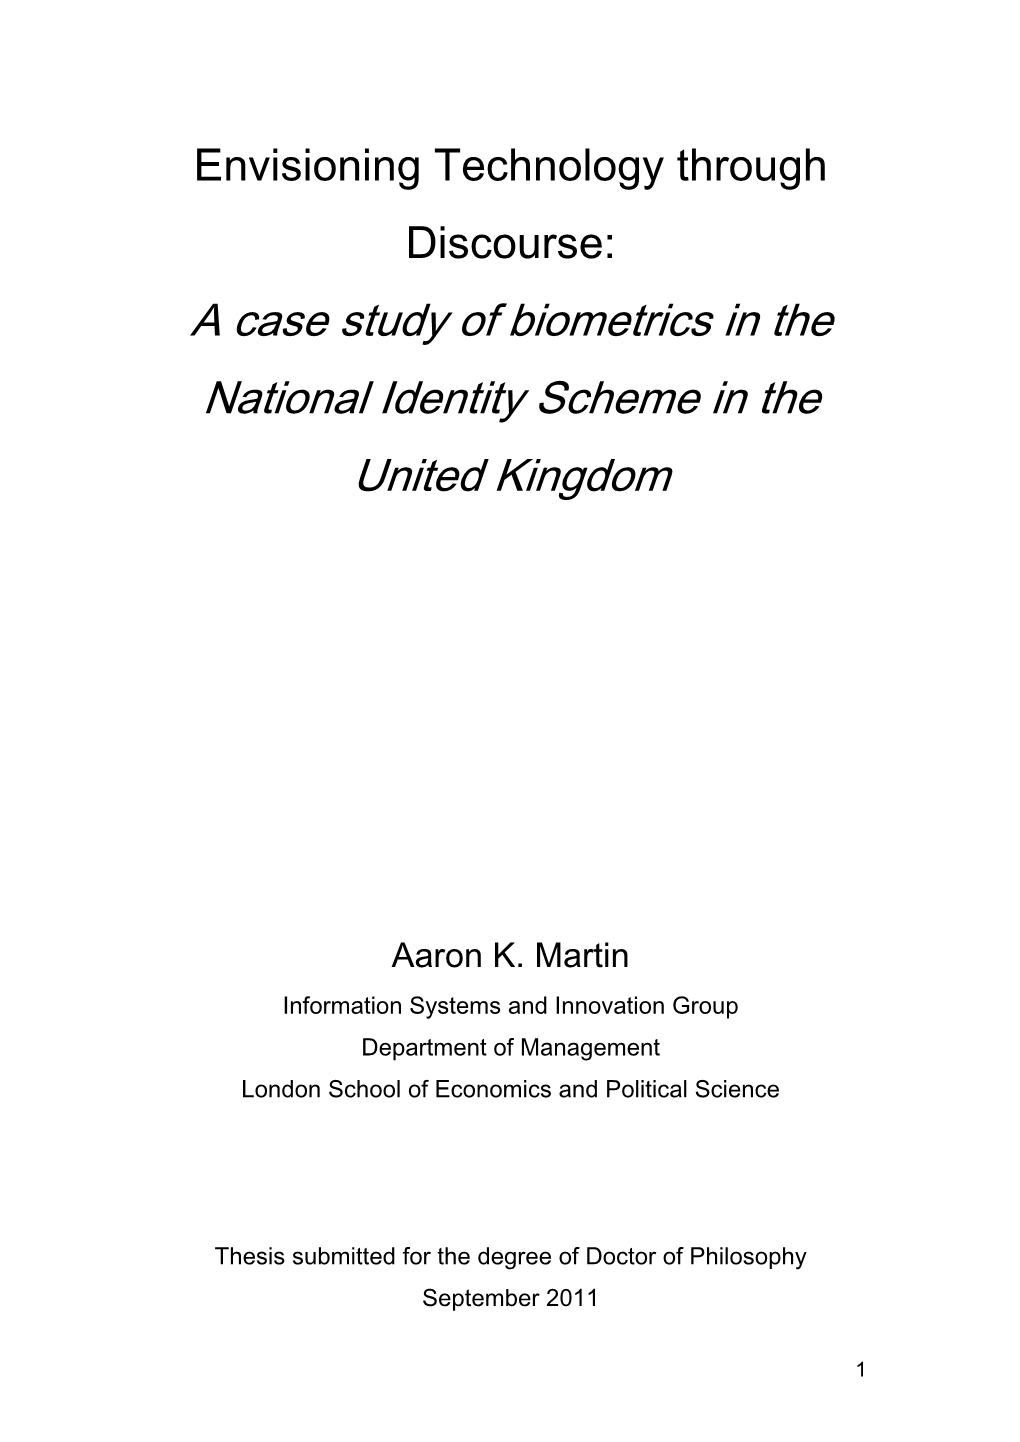 A Case Study of Biometrics in the National Identity Scheme in the United Kingdom